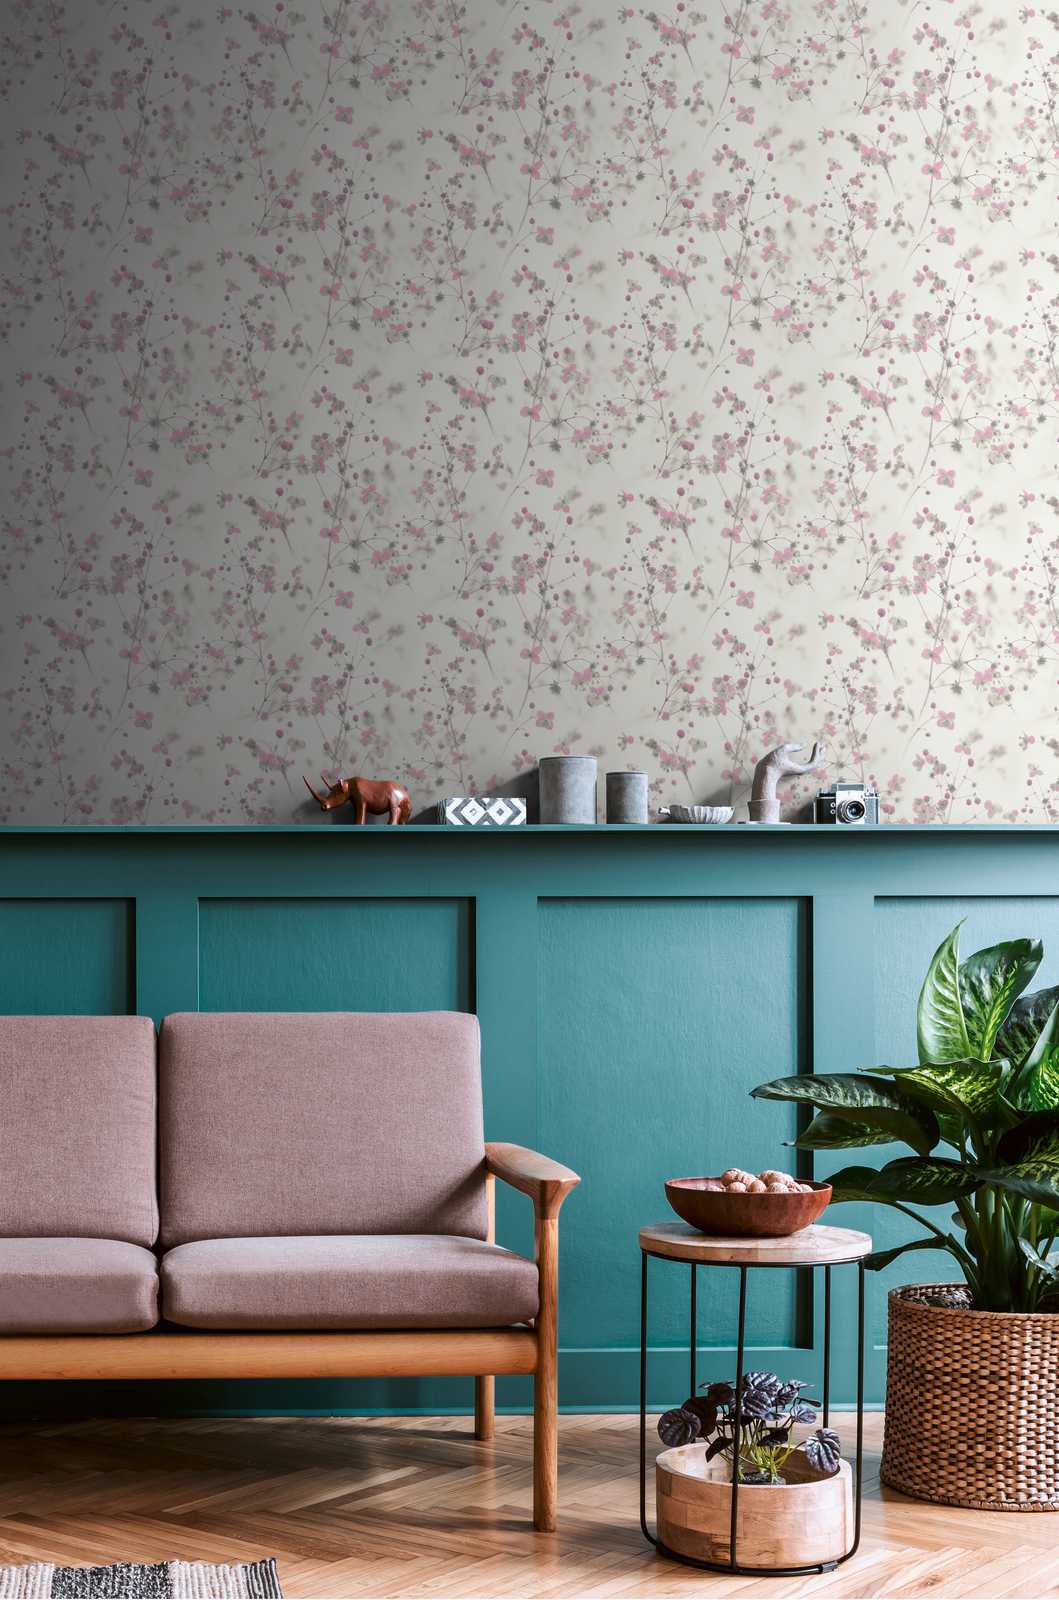             Modern country house wallpaper floral pattern - grey, pink
        